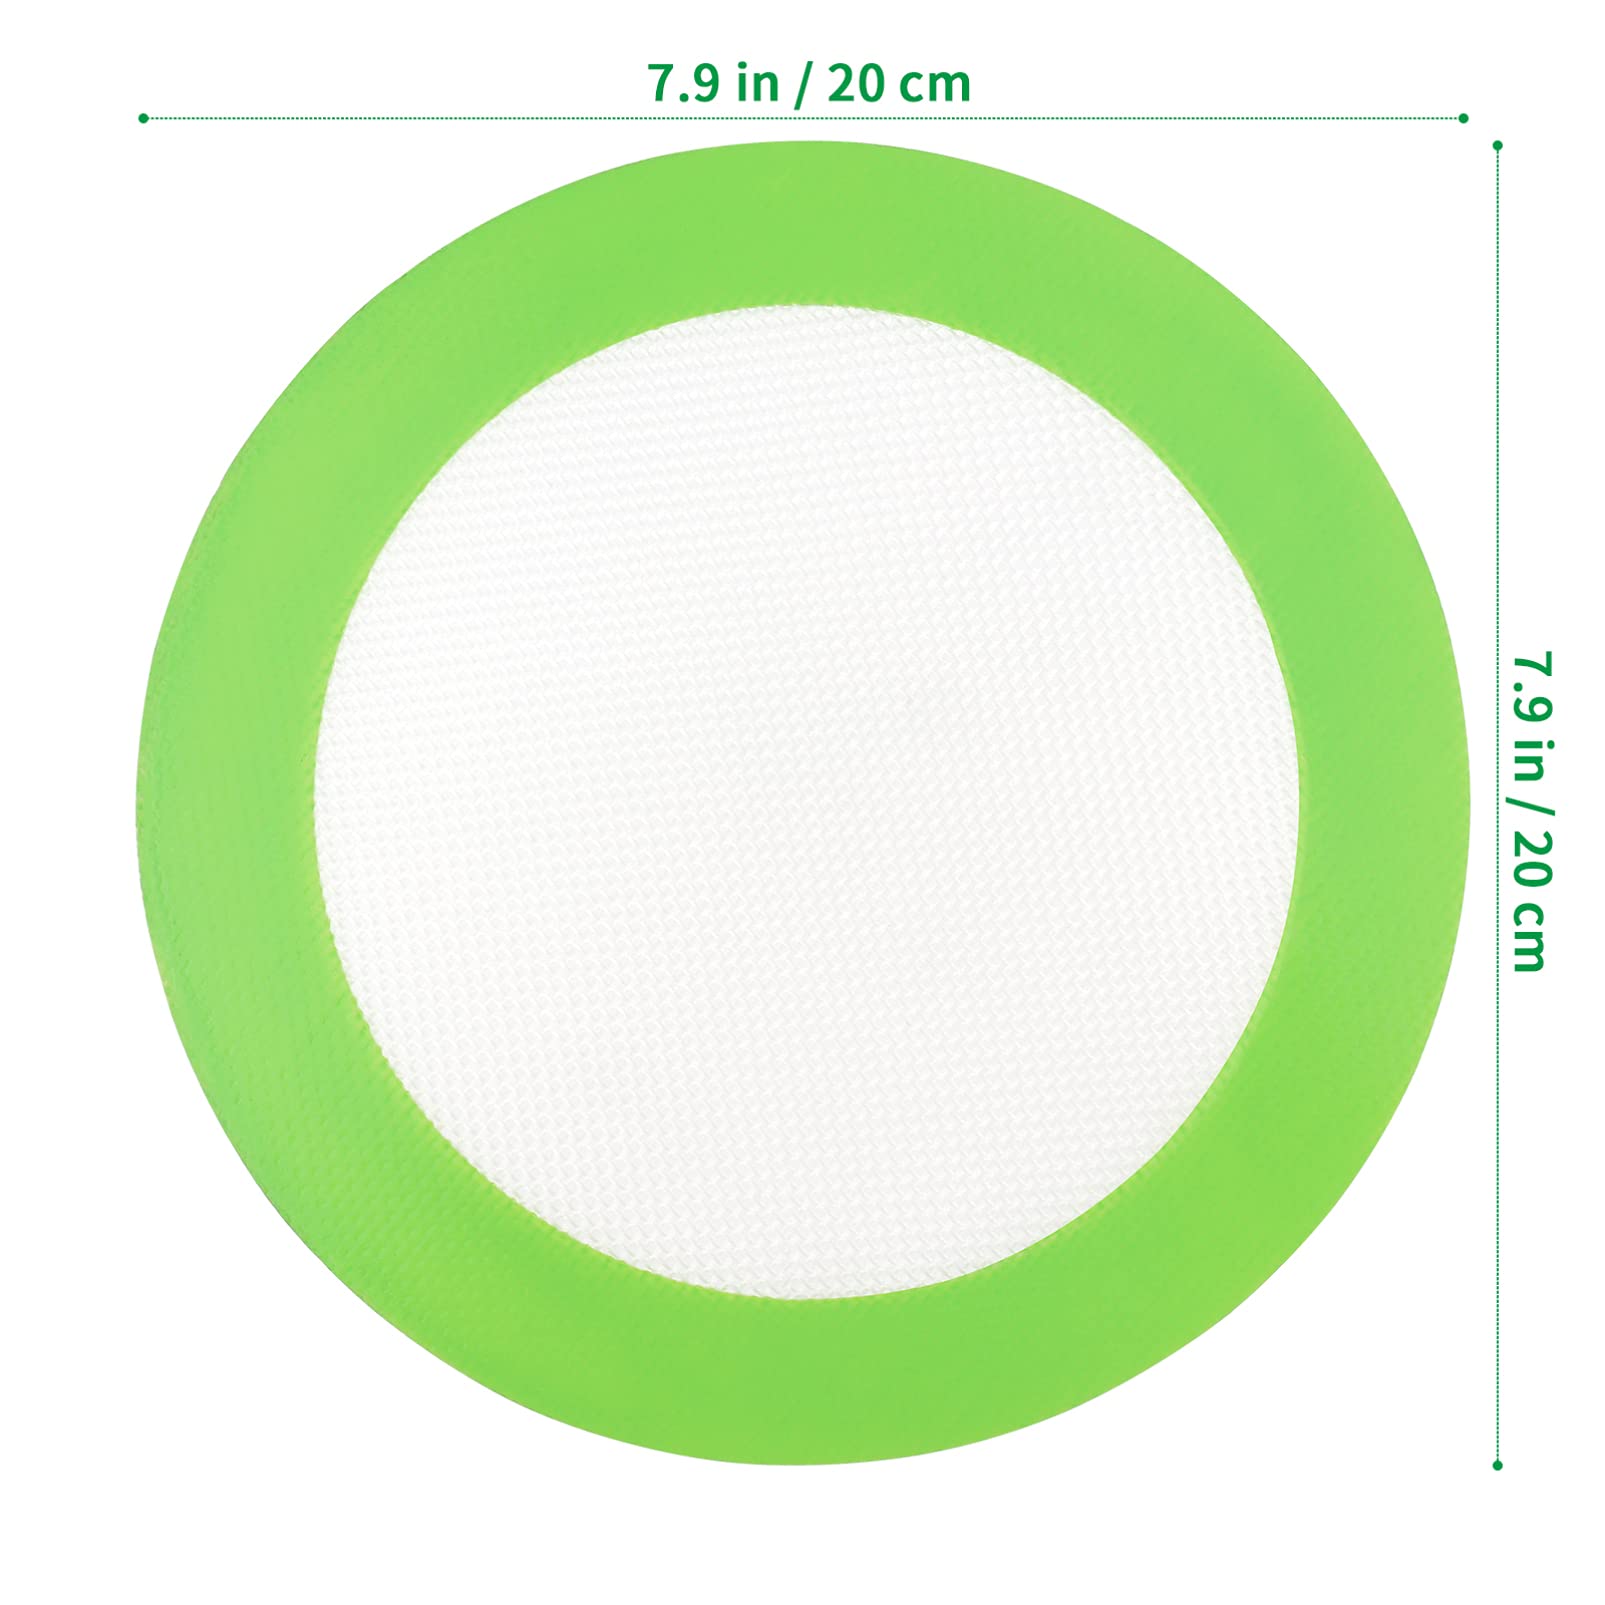 BESTonZON Silicone Baking Mats, 3-Pack Non-Stick Round Silicone Baking Sheet Liner,Reusable Heat Resistant Baking Pastry Sheets Round(Green)